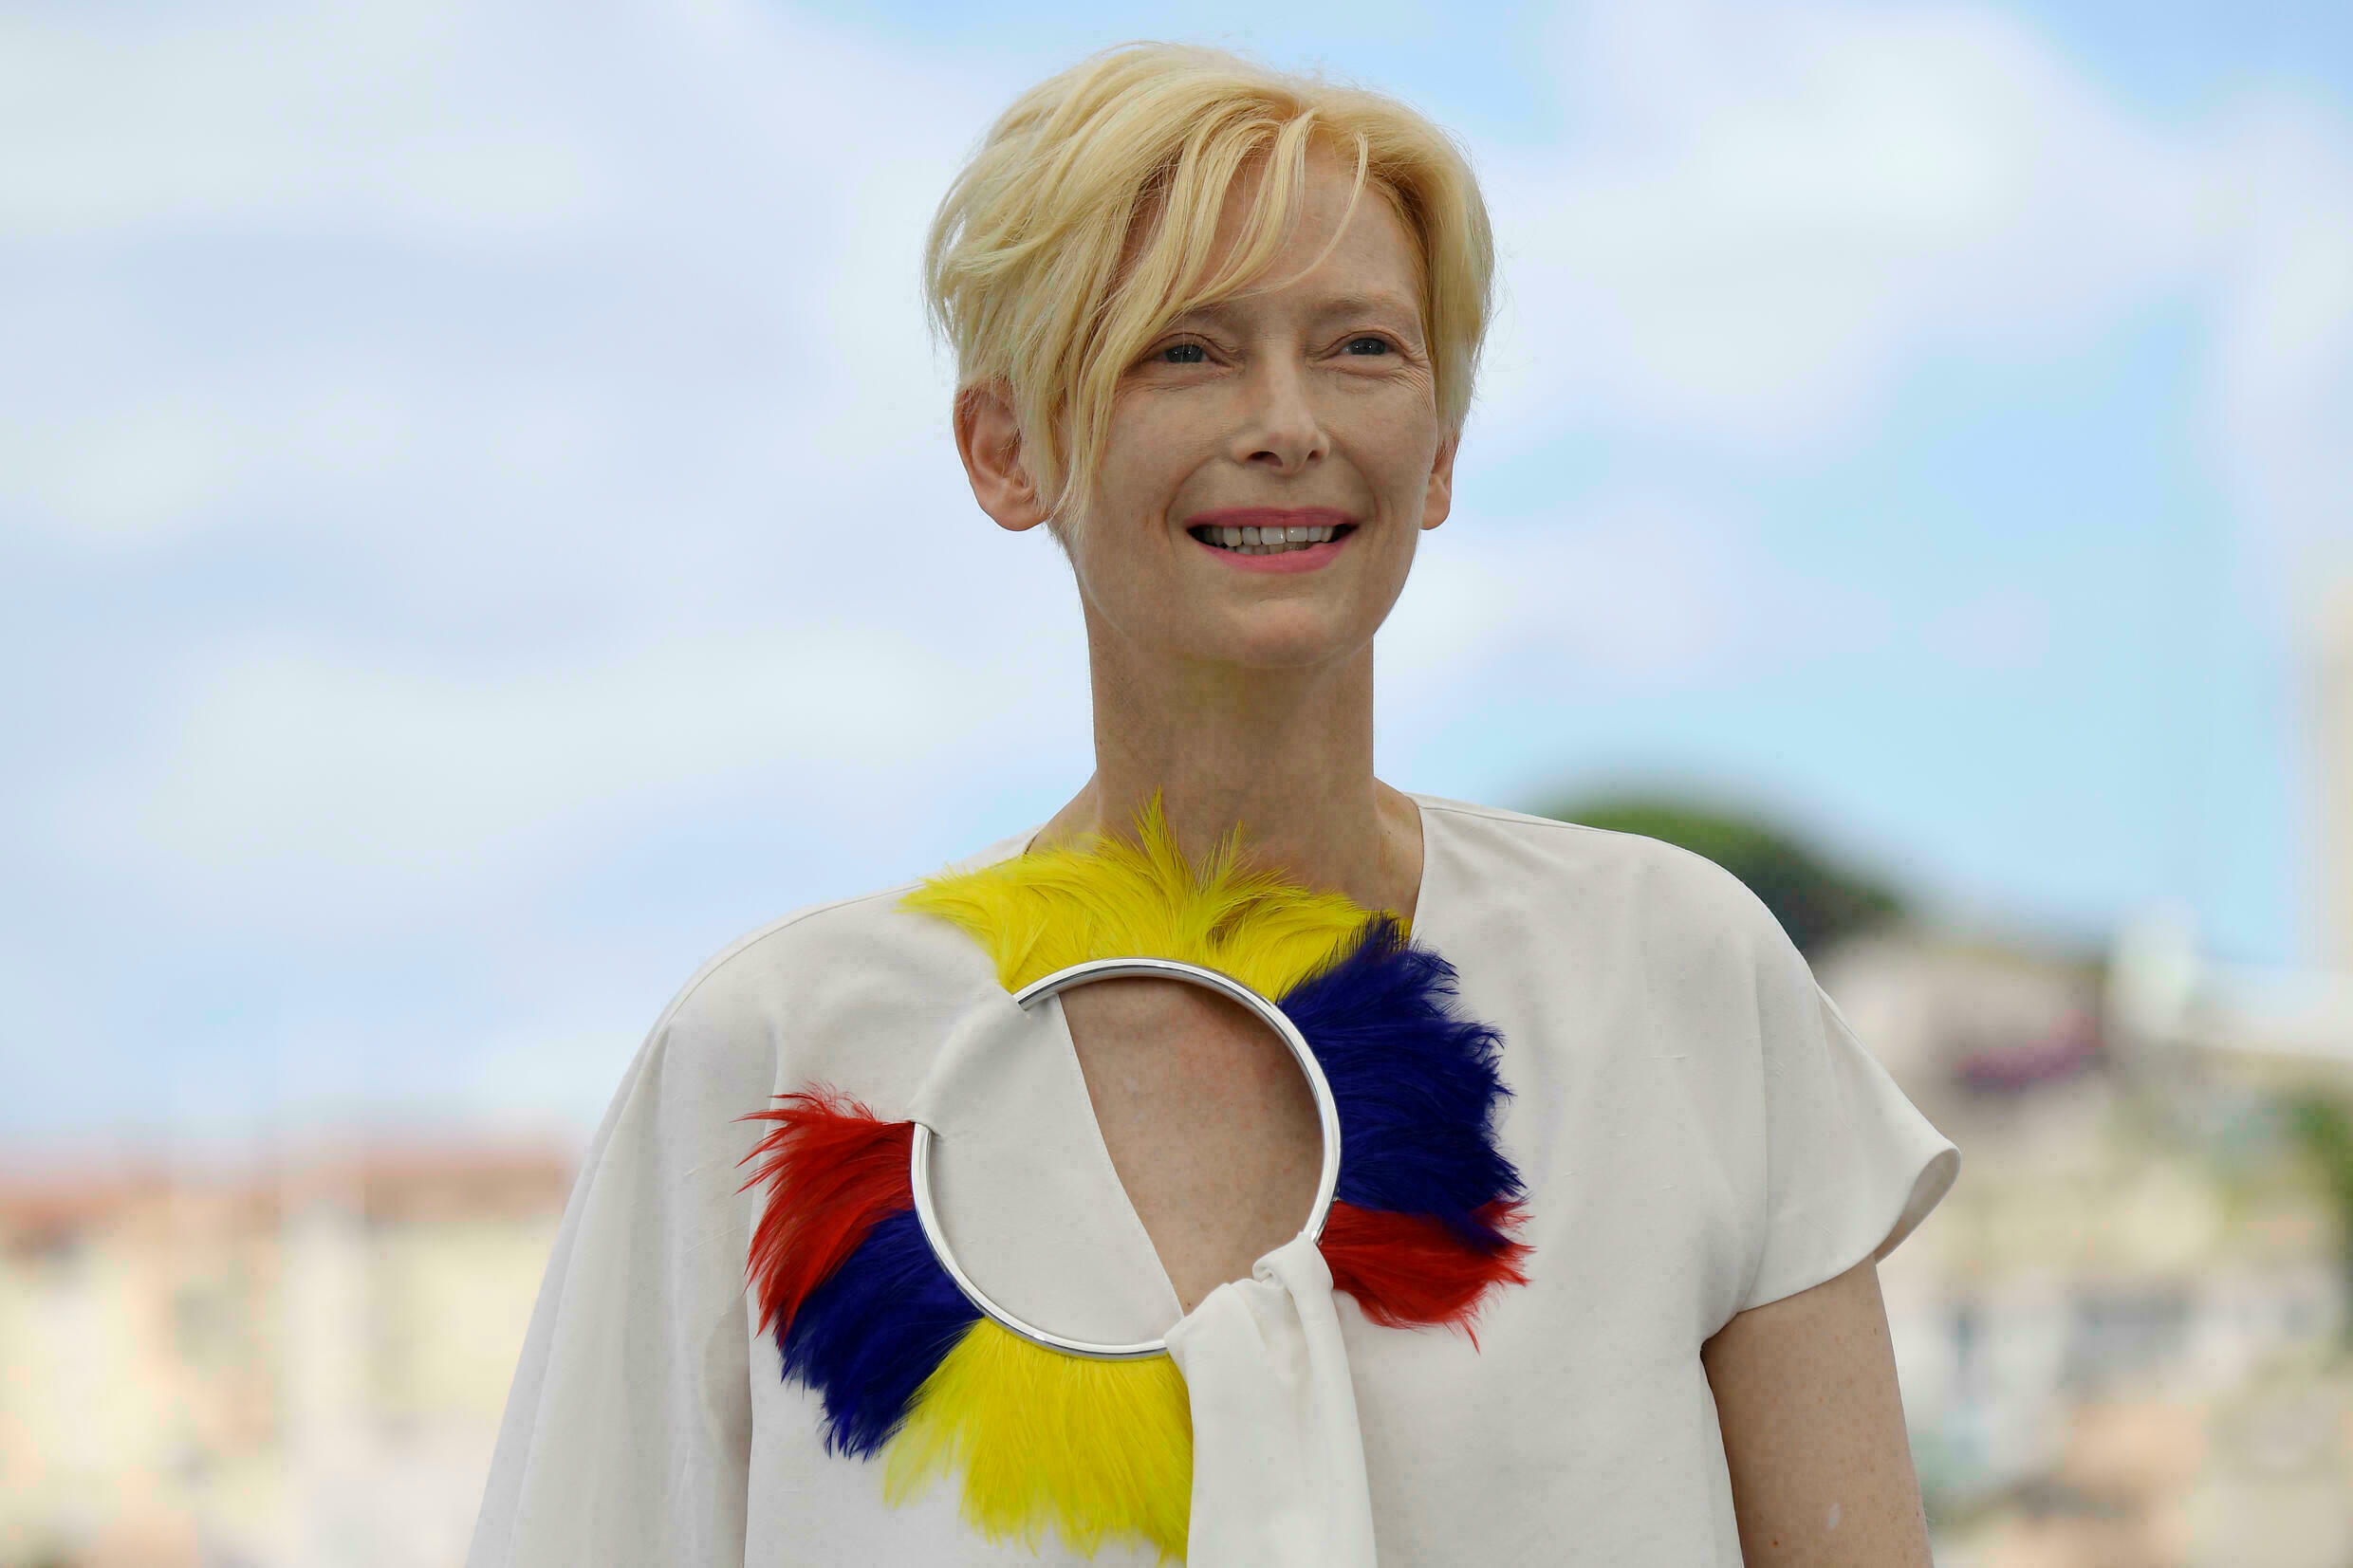 Swinton is the latest star to get involved with VR, narrating new release 'Goliath'